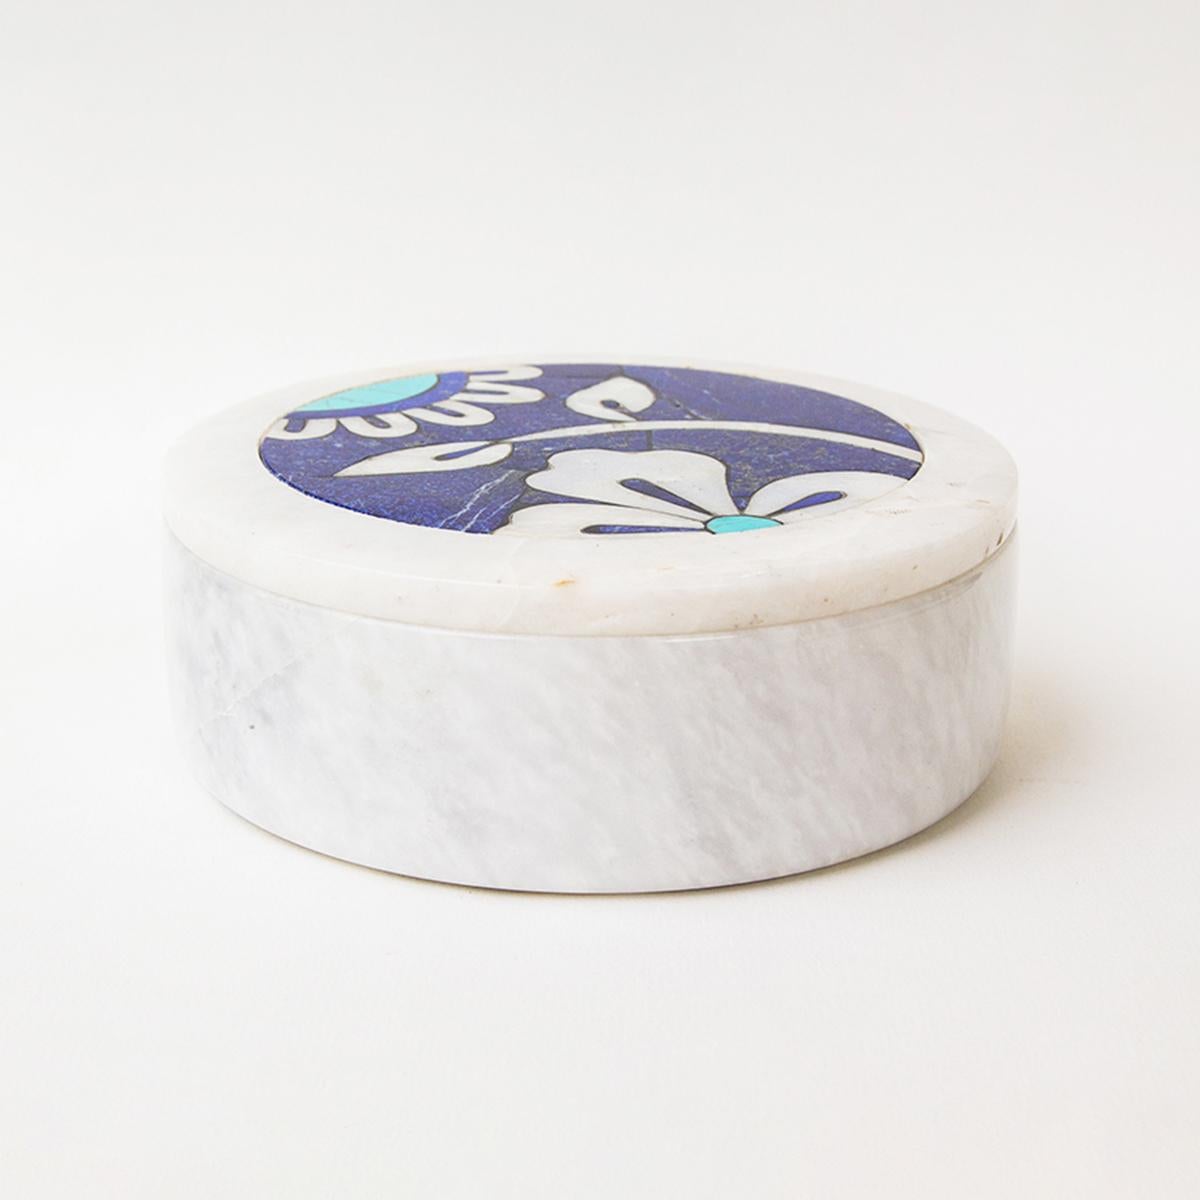 White endless dance box by Studio Lel
Dimensions: D 12.7 x W 12.7 x H 5 cm.
Materials: Lapis Lazuli, Onyx, Marble

These are handmade from semiprecious stone and marble in a small artisanal workshop. Please note that variations and slight